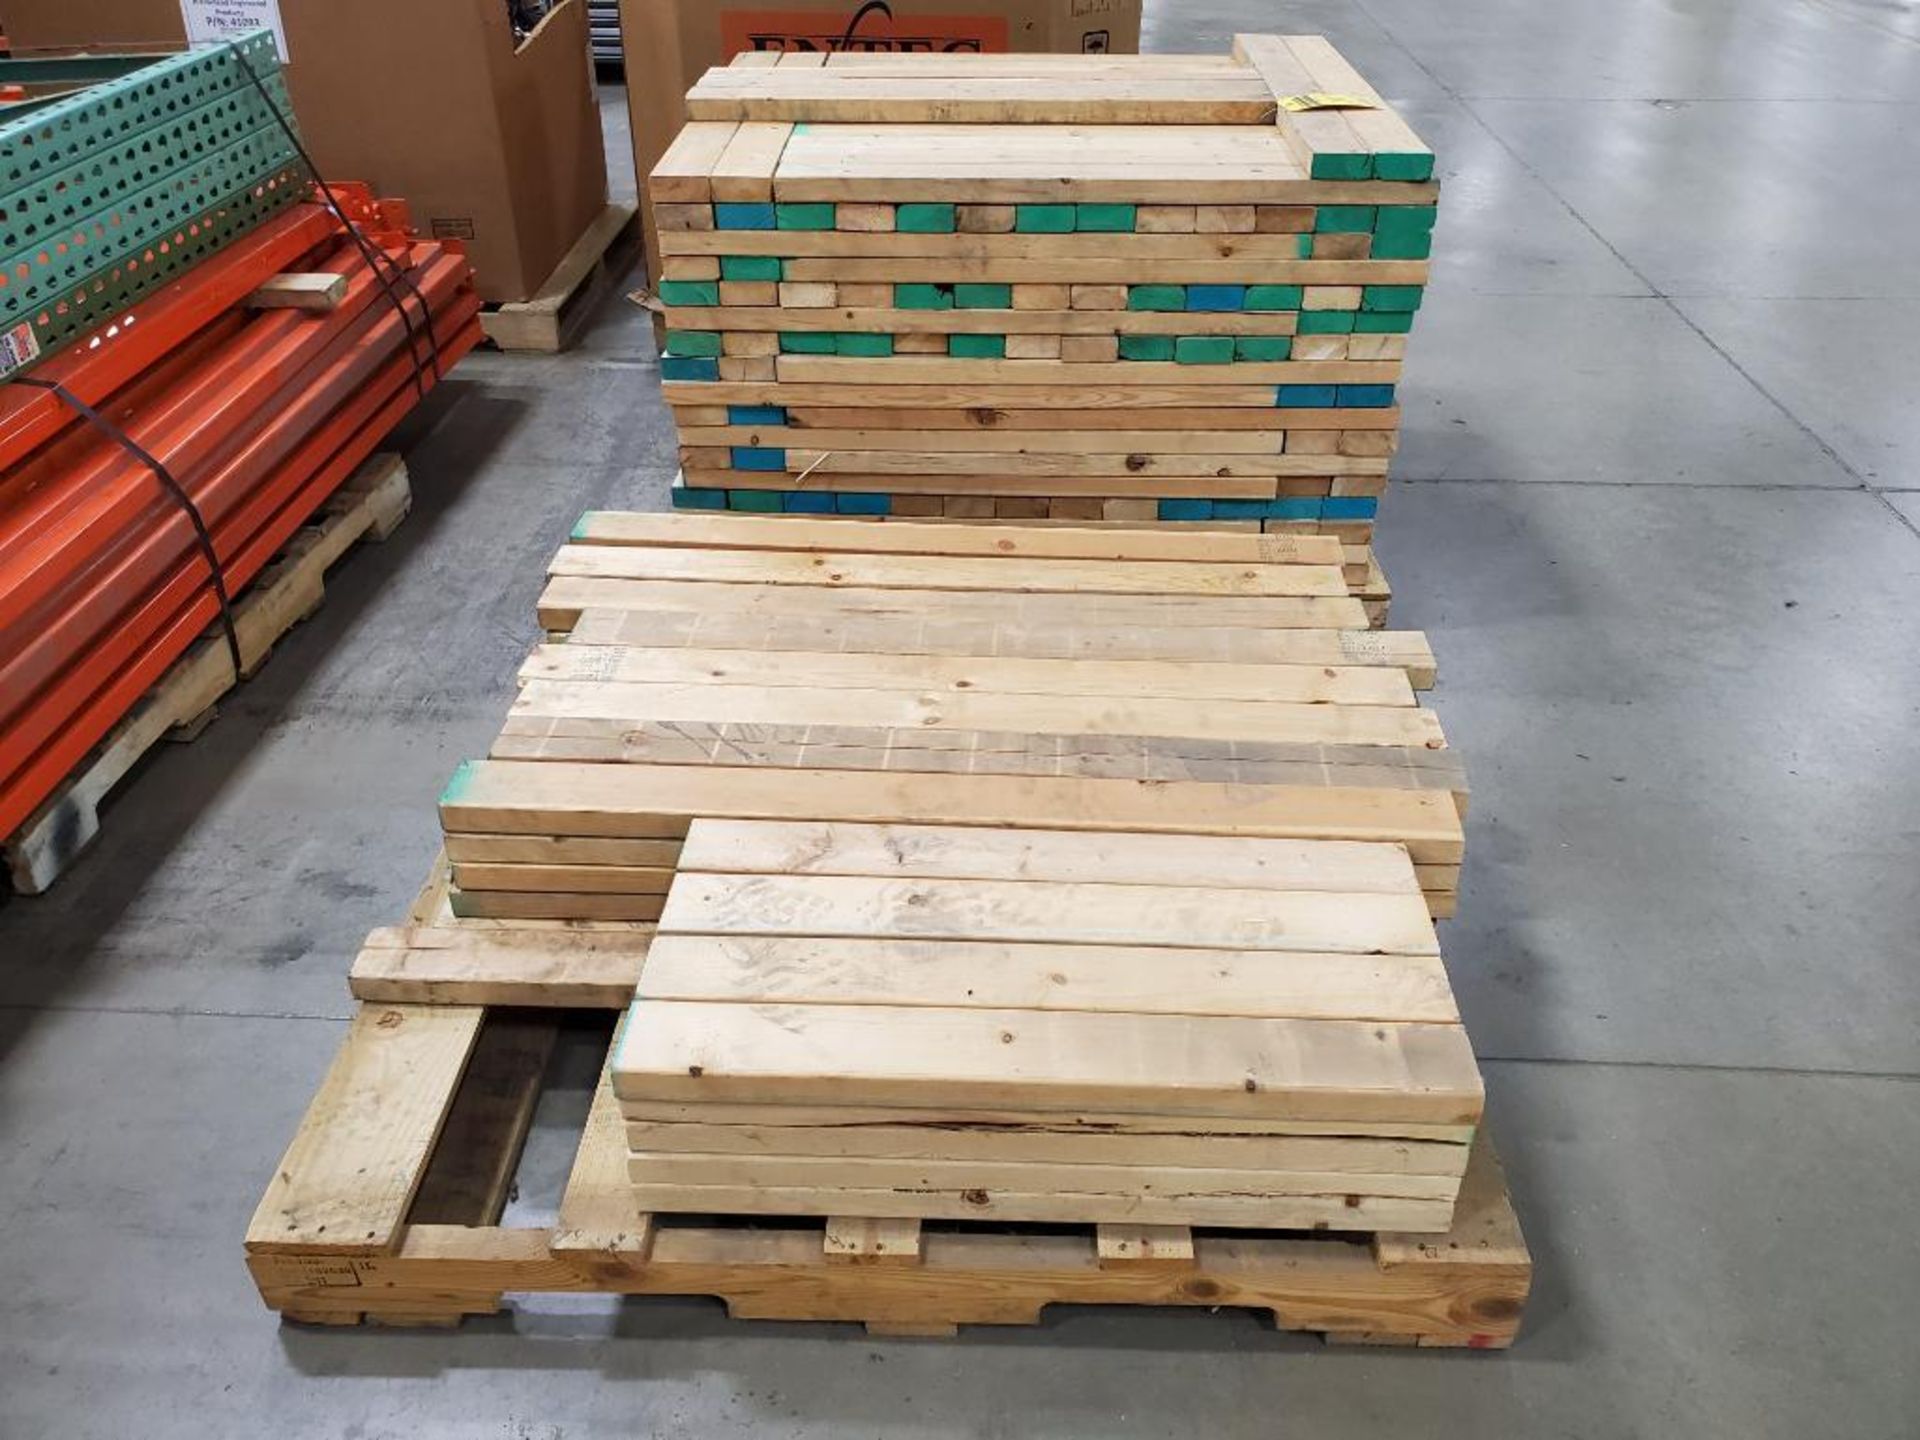 (This Item Is Located in Jasper, IN) (2) Pallets of Precut Lumber, 44-1/2" L, 38-1/2" L, & 30-1/2" L - Image 4 of 4